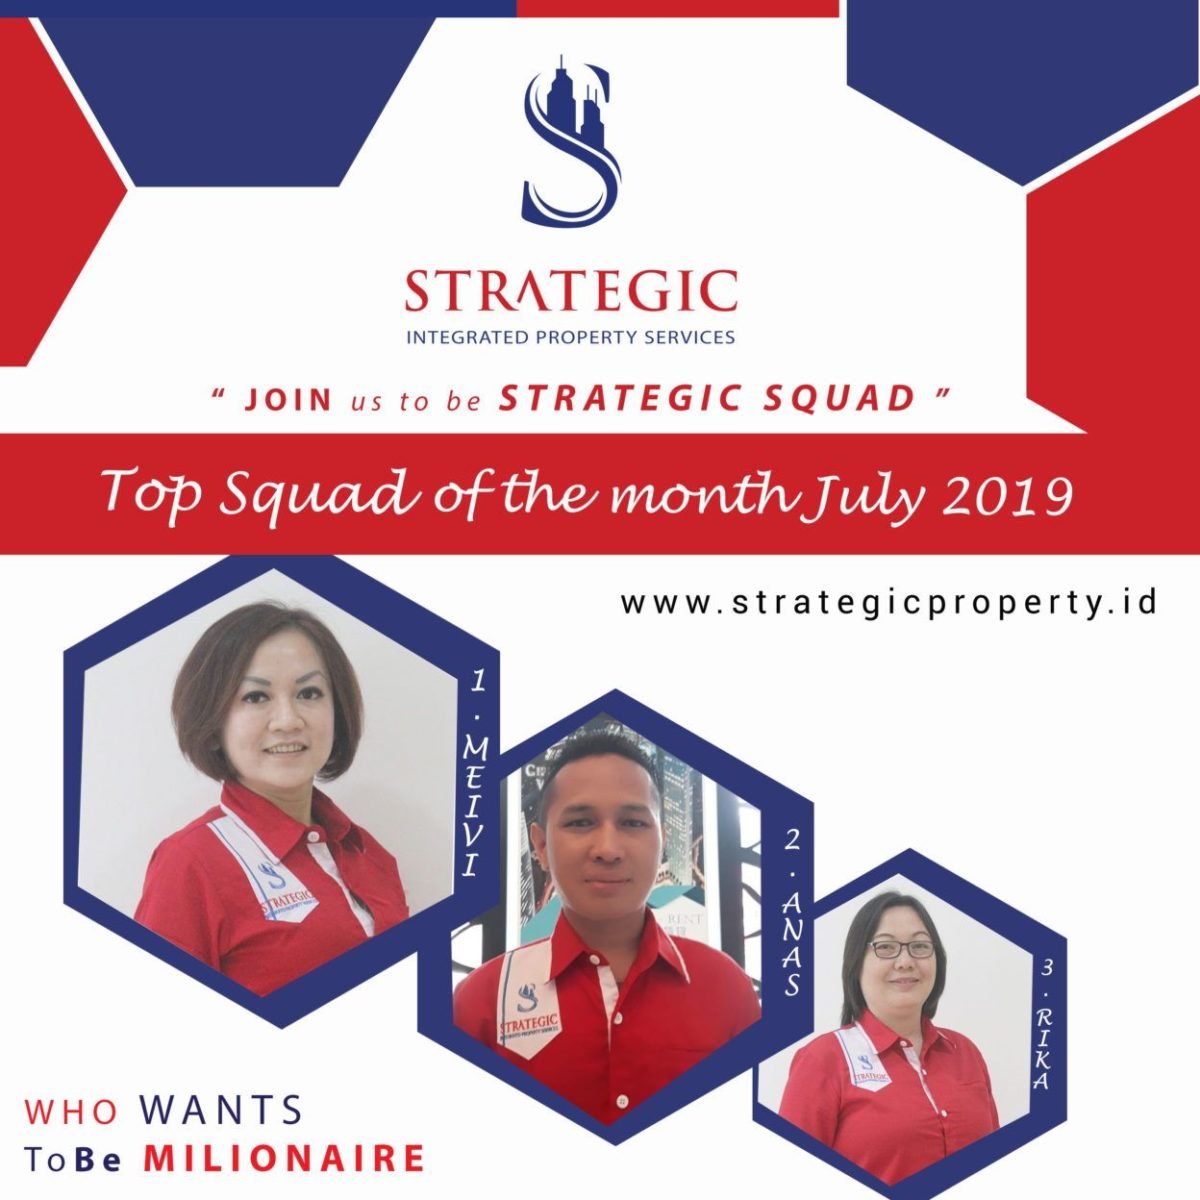 TOP SQUAD OF THE MONTH JULY 2019 STRATEGIC PROPERTY